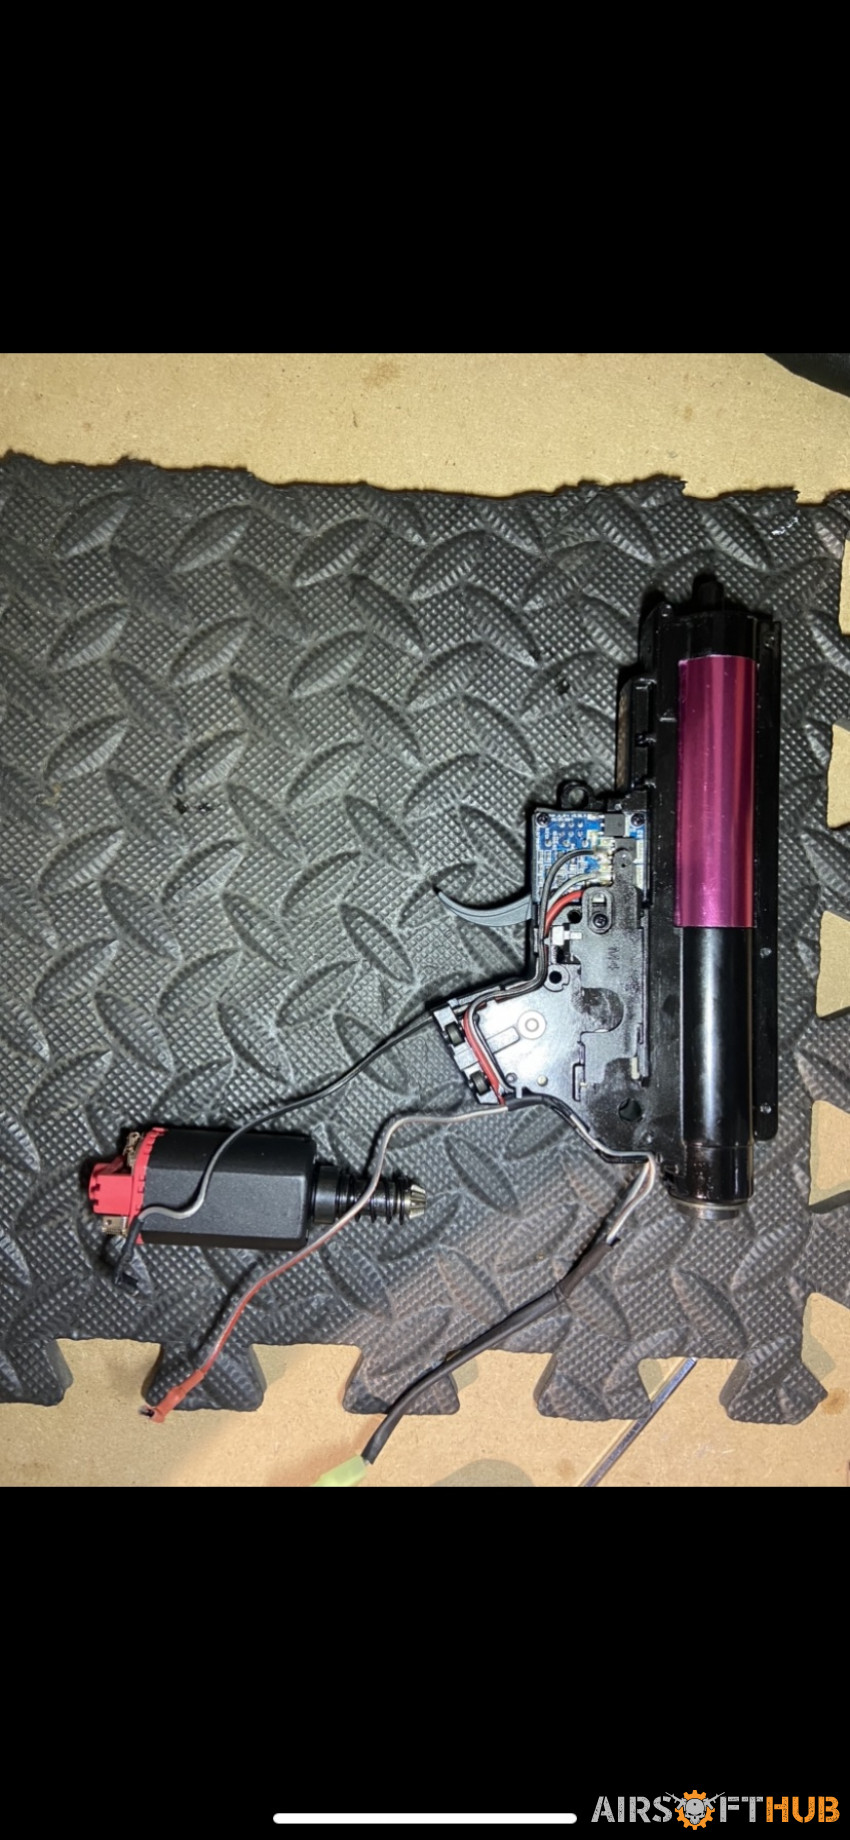 Ares amoeba gearbox and motor - Used airsoft equipment